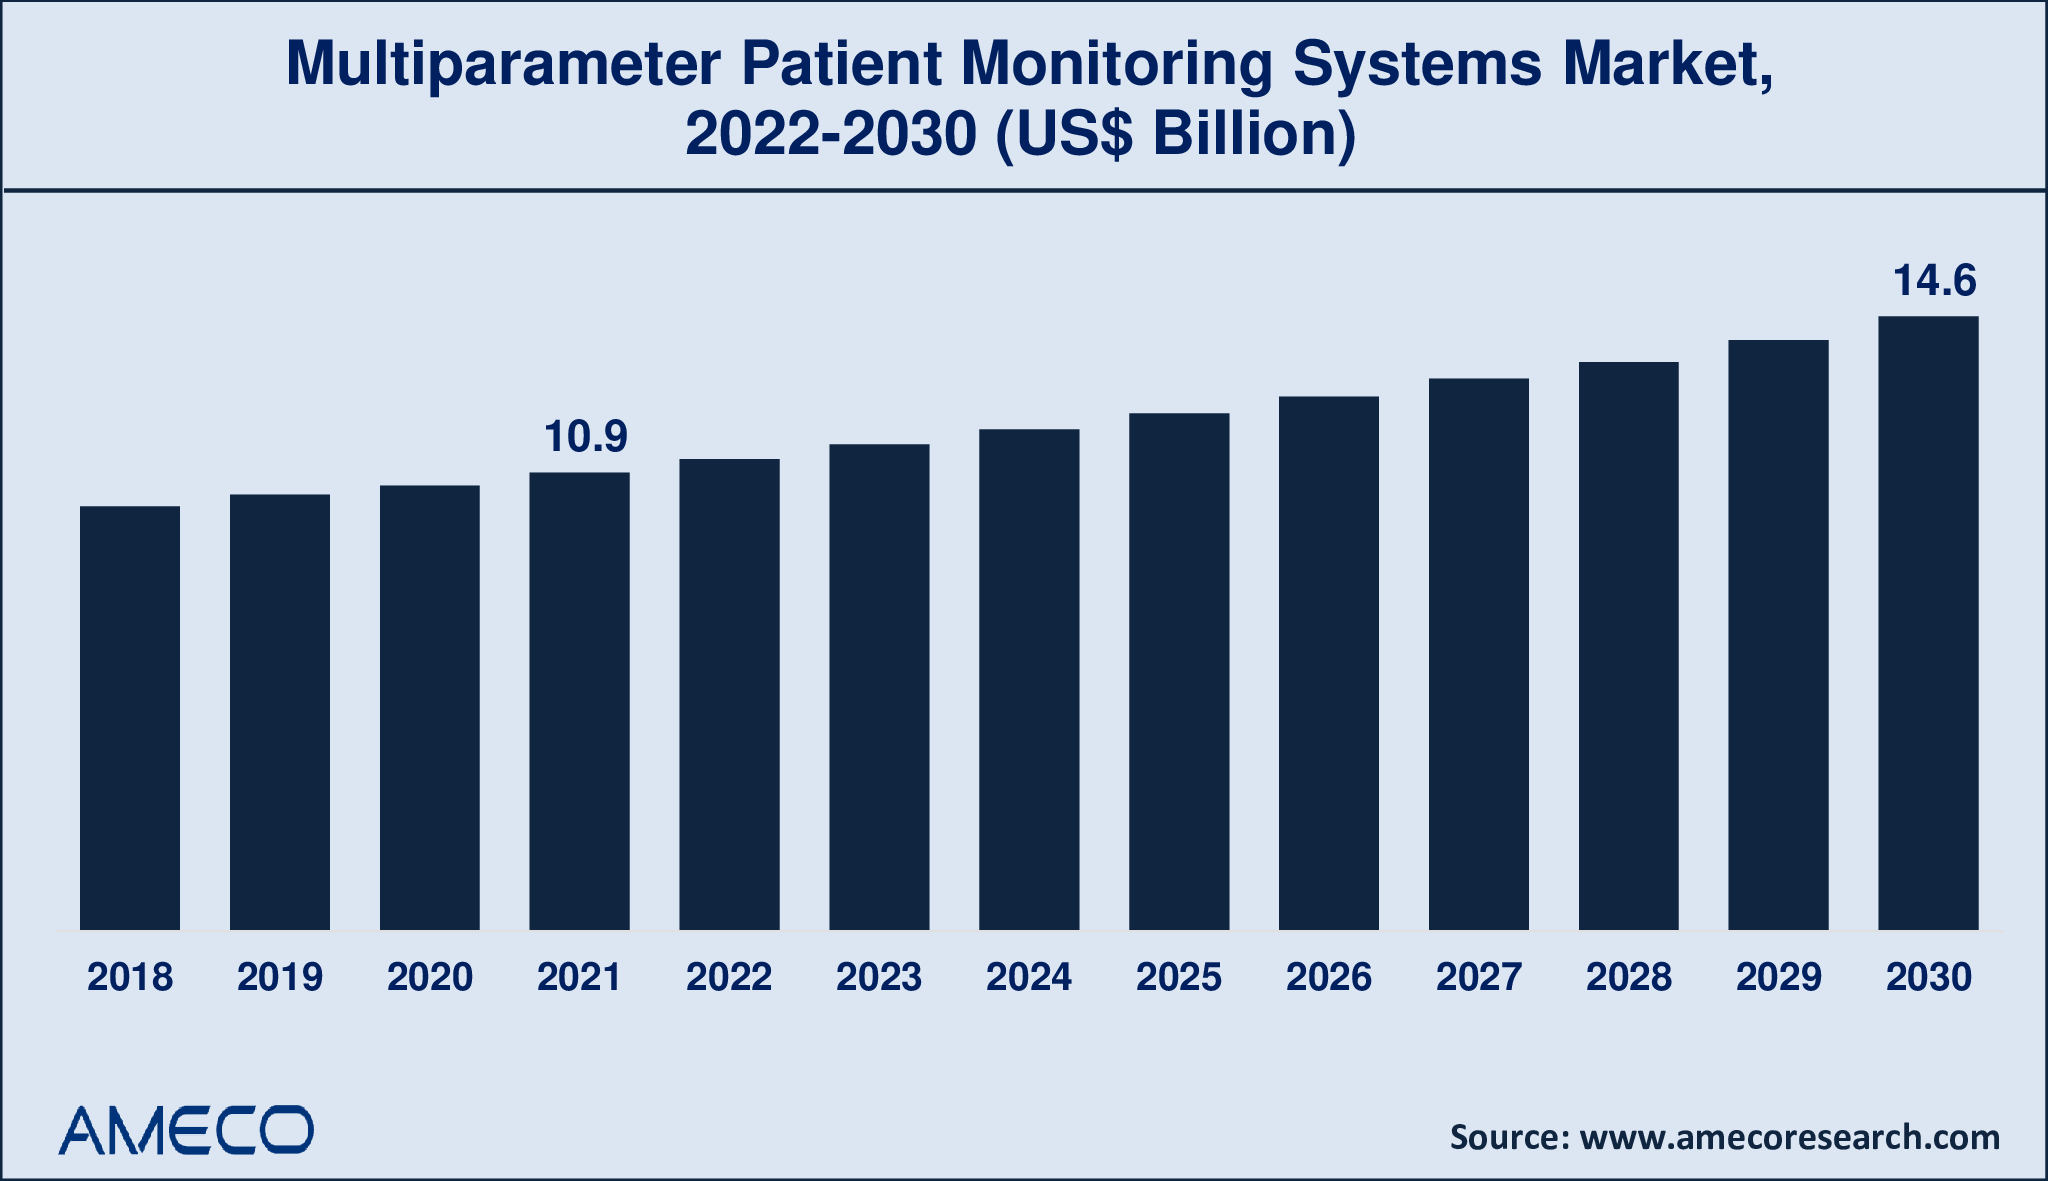 Multiparameter Patient Monitoring Systems Market Report 2030